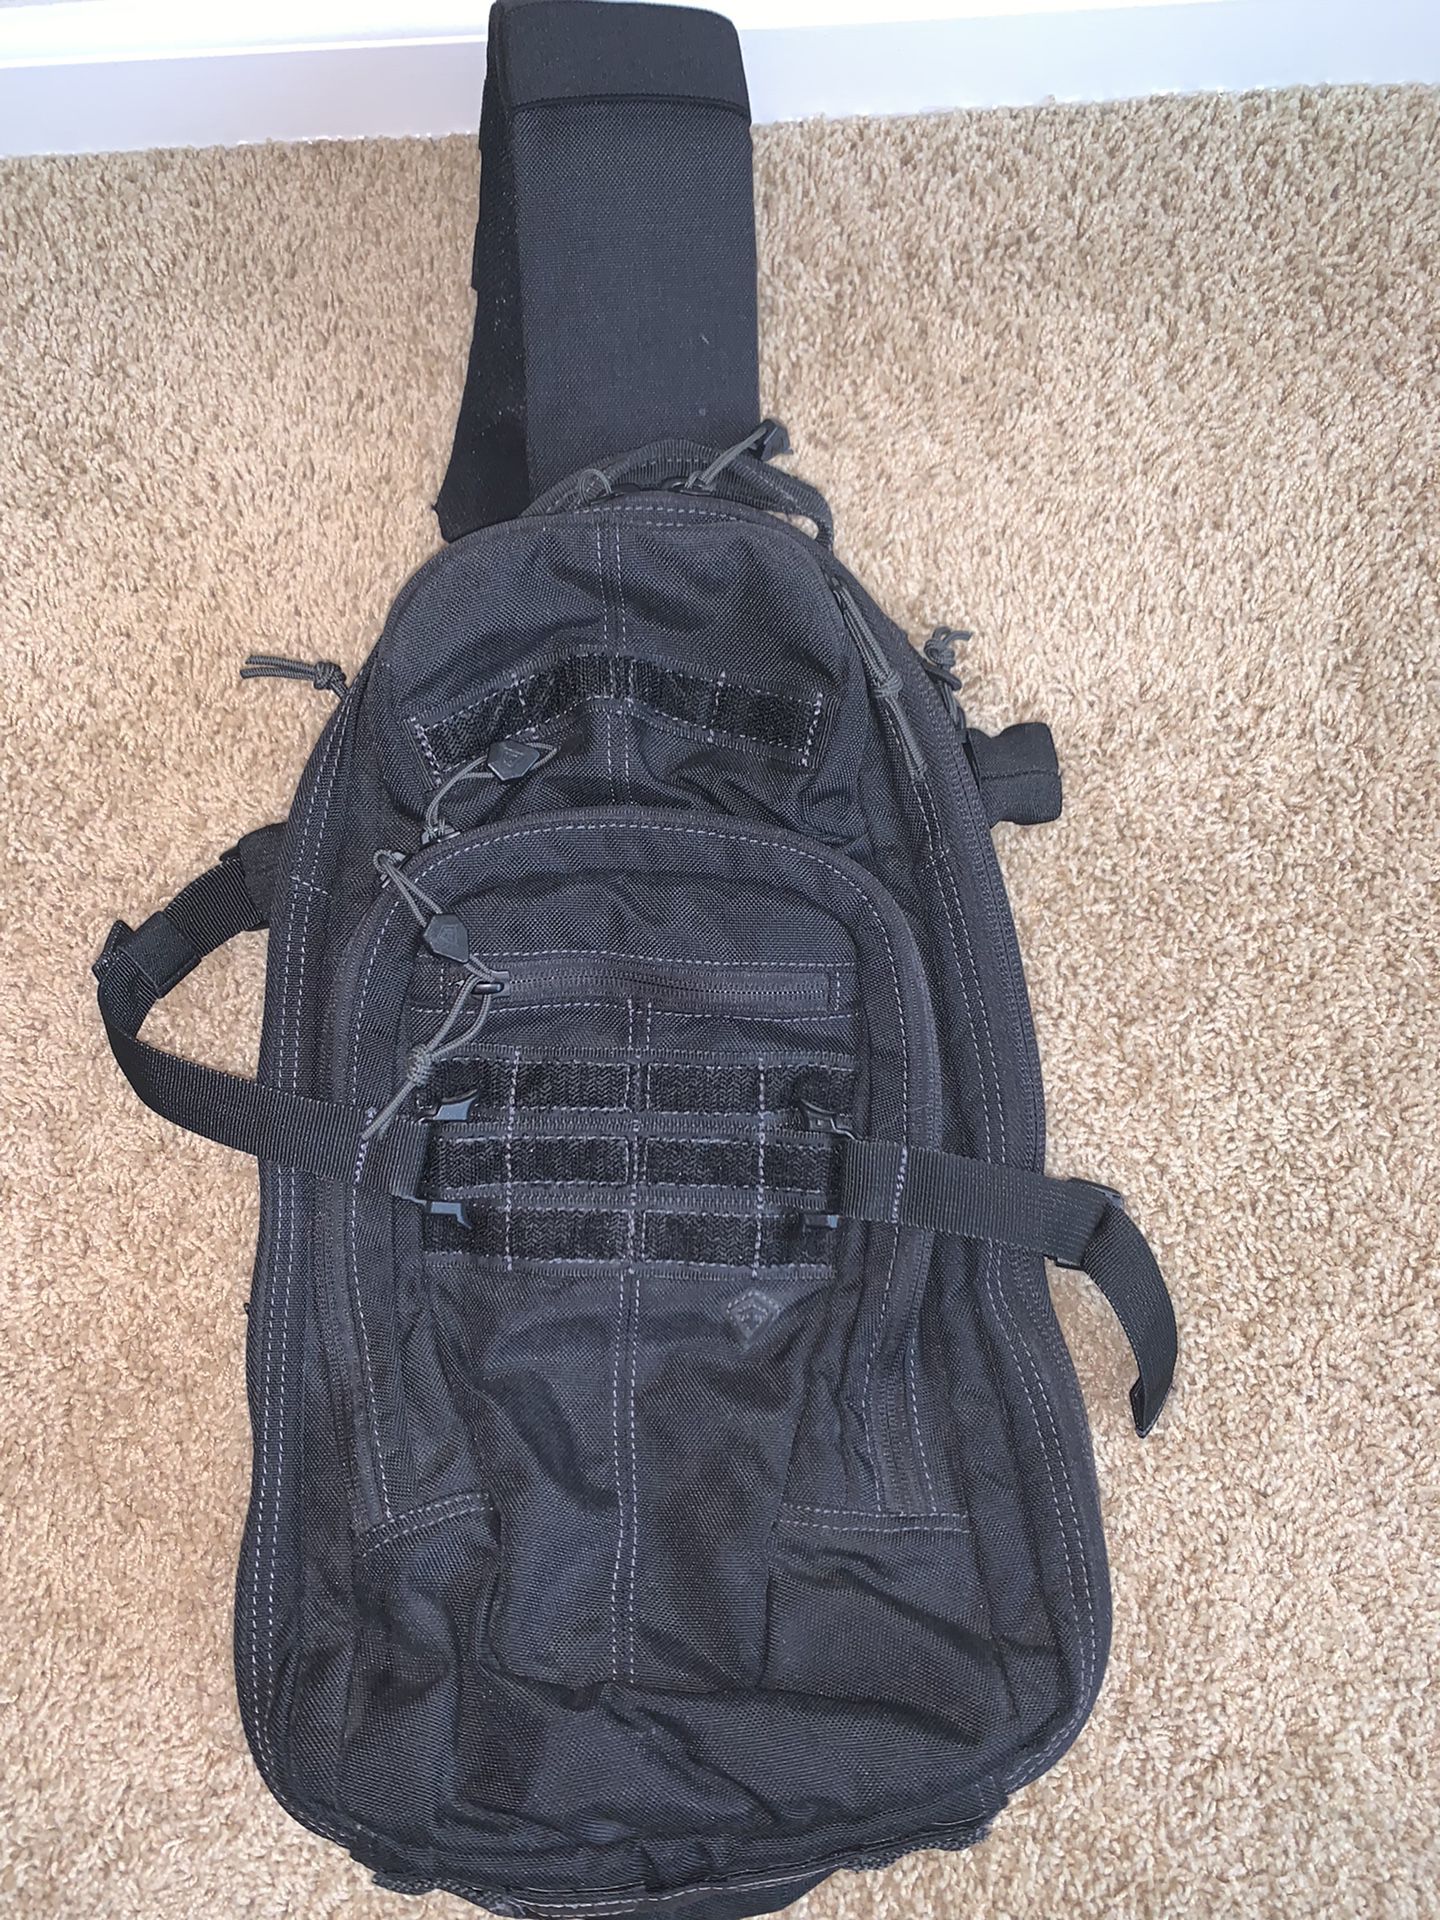 First Tactical Crosshatch Black Tactical Nylon Sling Pack